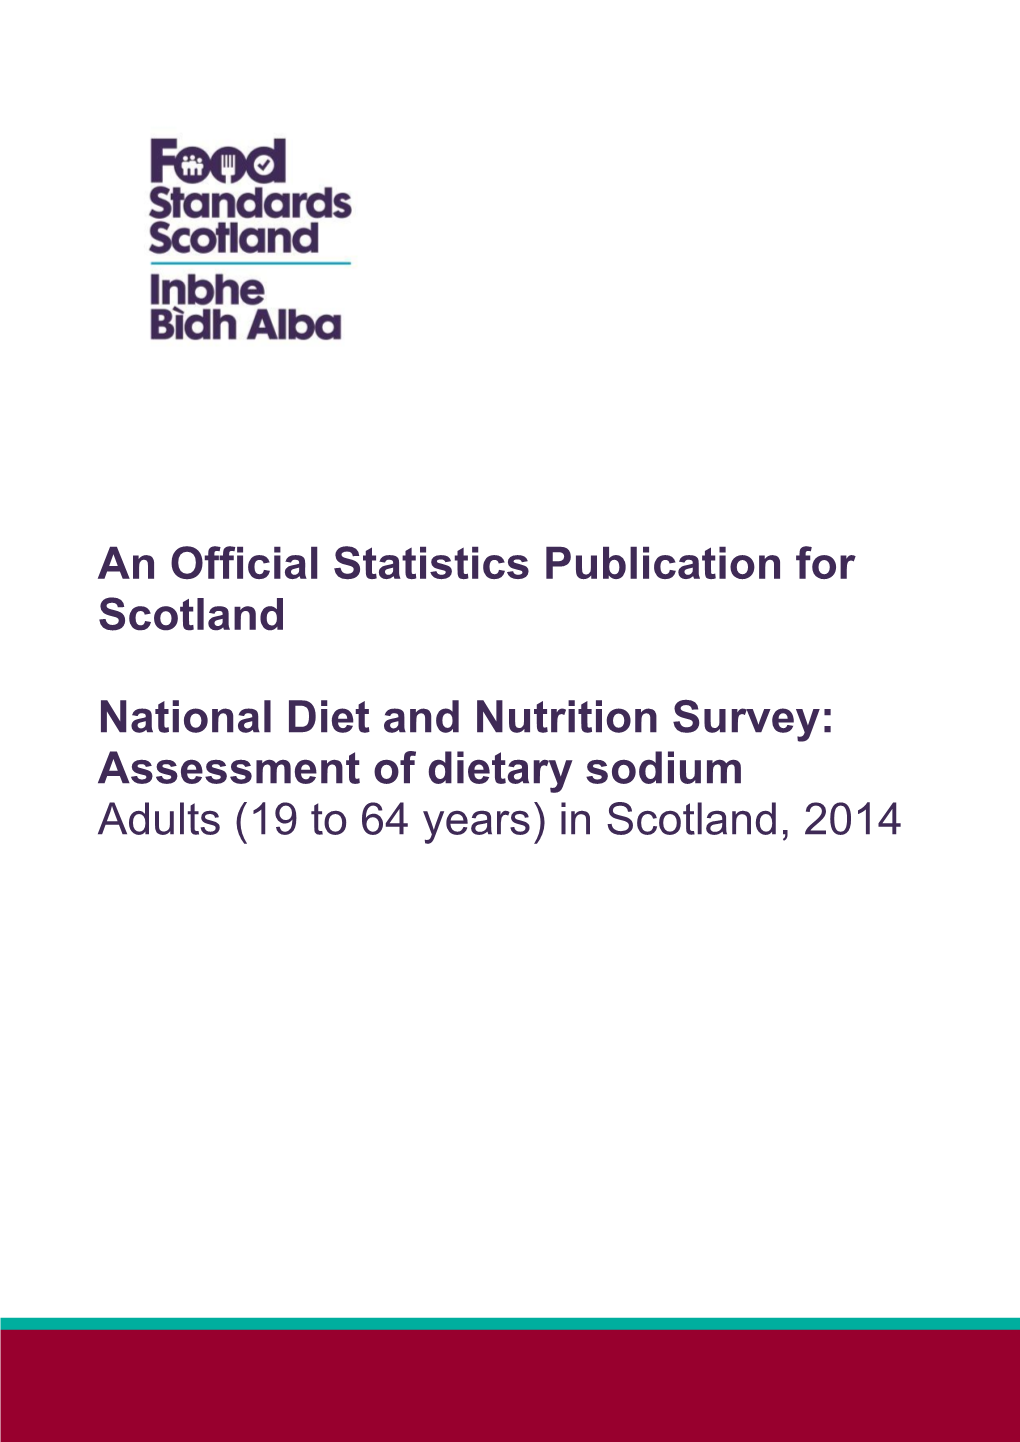 National Diet and Nutrition Survey: Assessment of Dietary Sodium Adults (19 to 64 Years) in Scotland, 2014